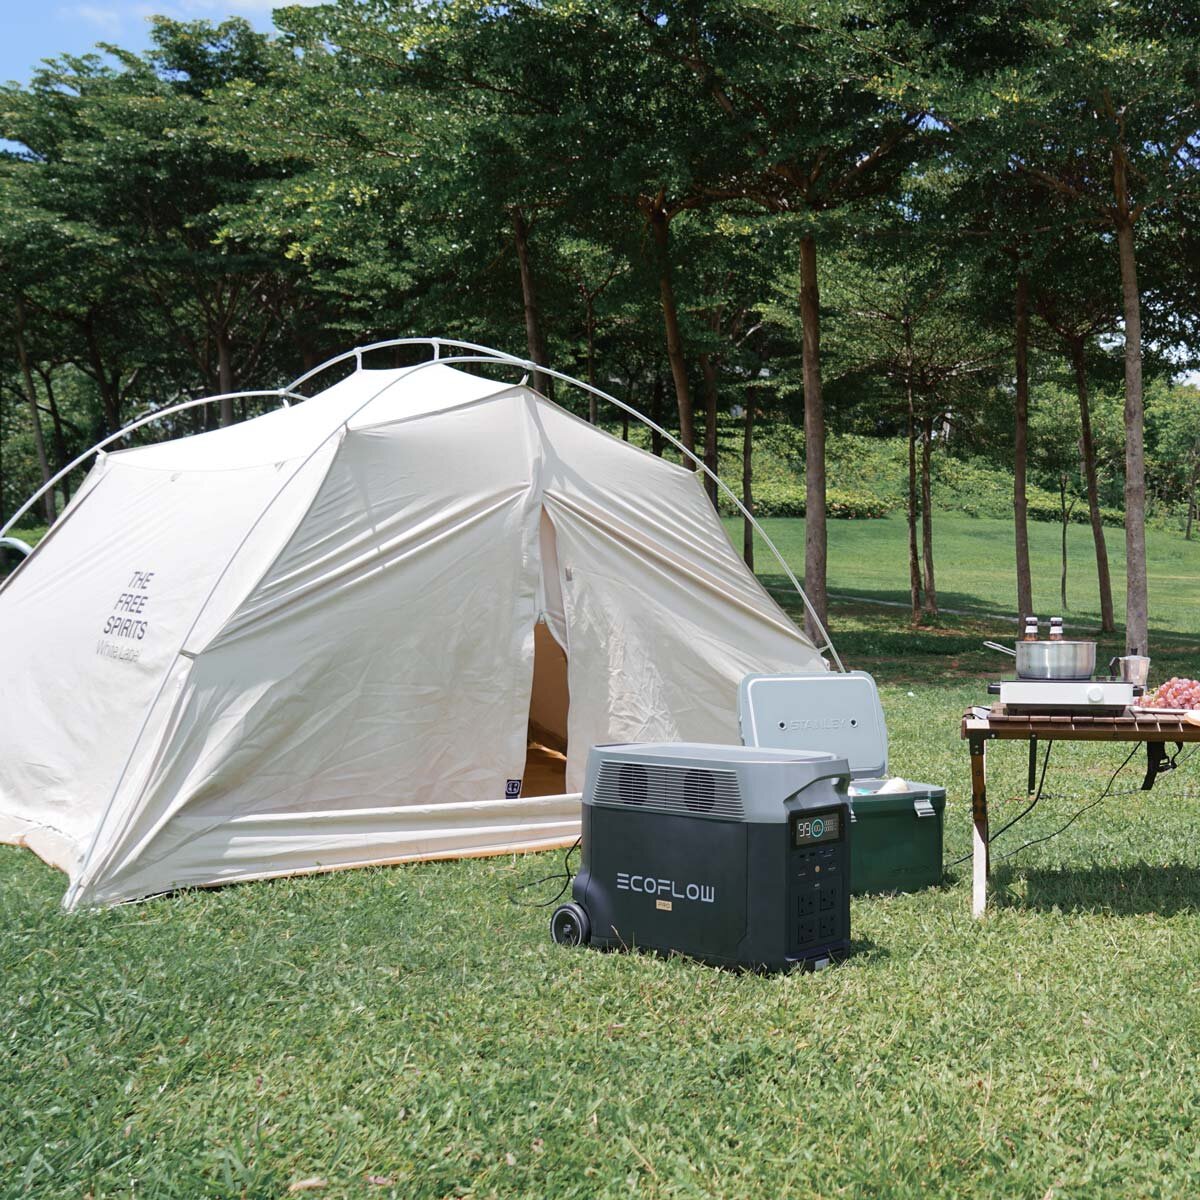 Lifestyle image of Delta Pro in camping setting